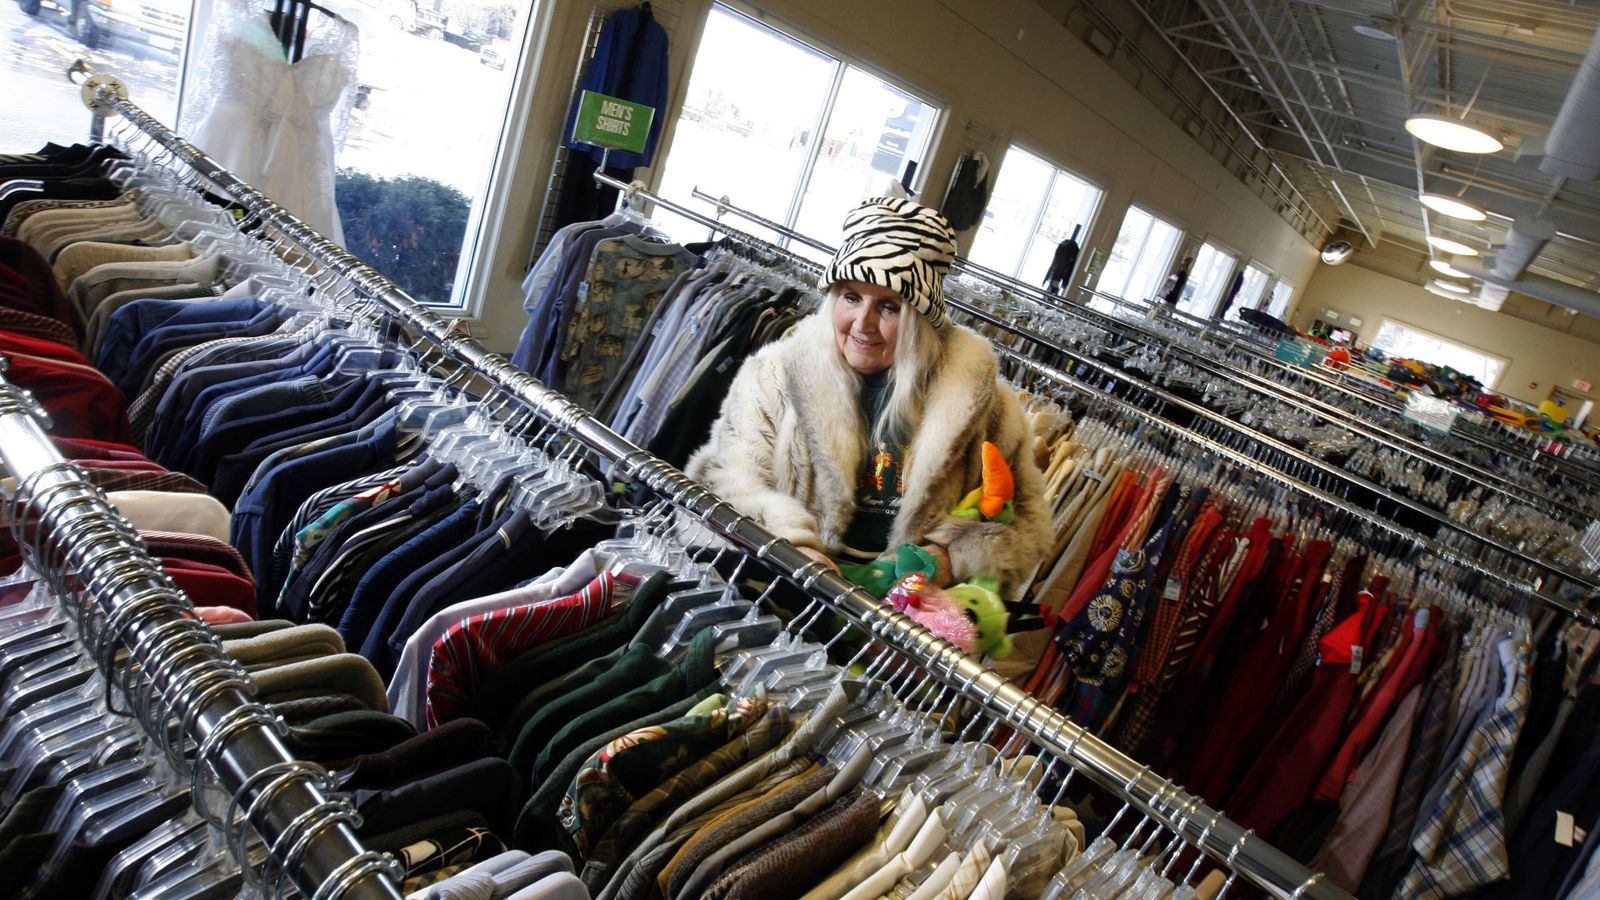 15 ideas for thrift shopping, as told by Chicago readers - Axios